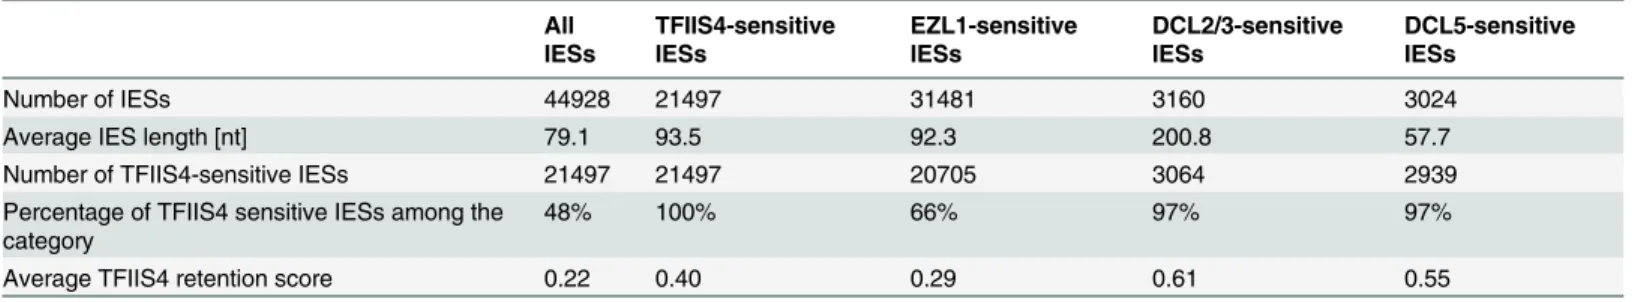 Table 2. Global analysis of genome rearrangements in TFIIS4 silencing—comparison with EZL1, DCL2/3 and DCL5.